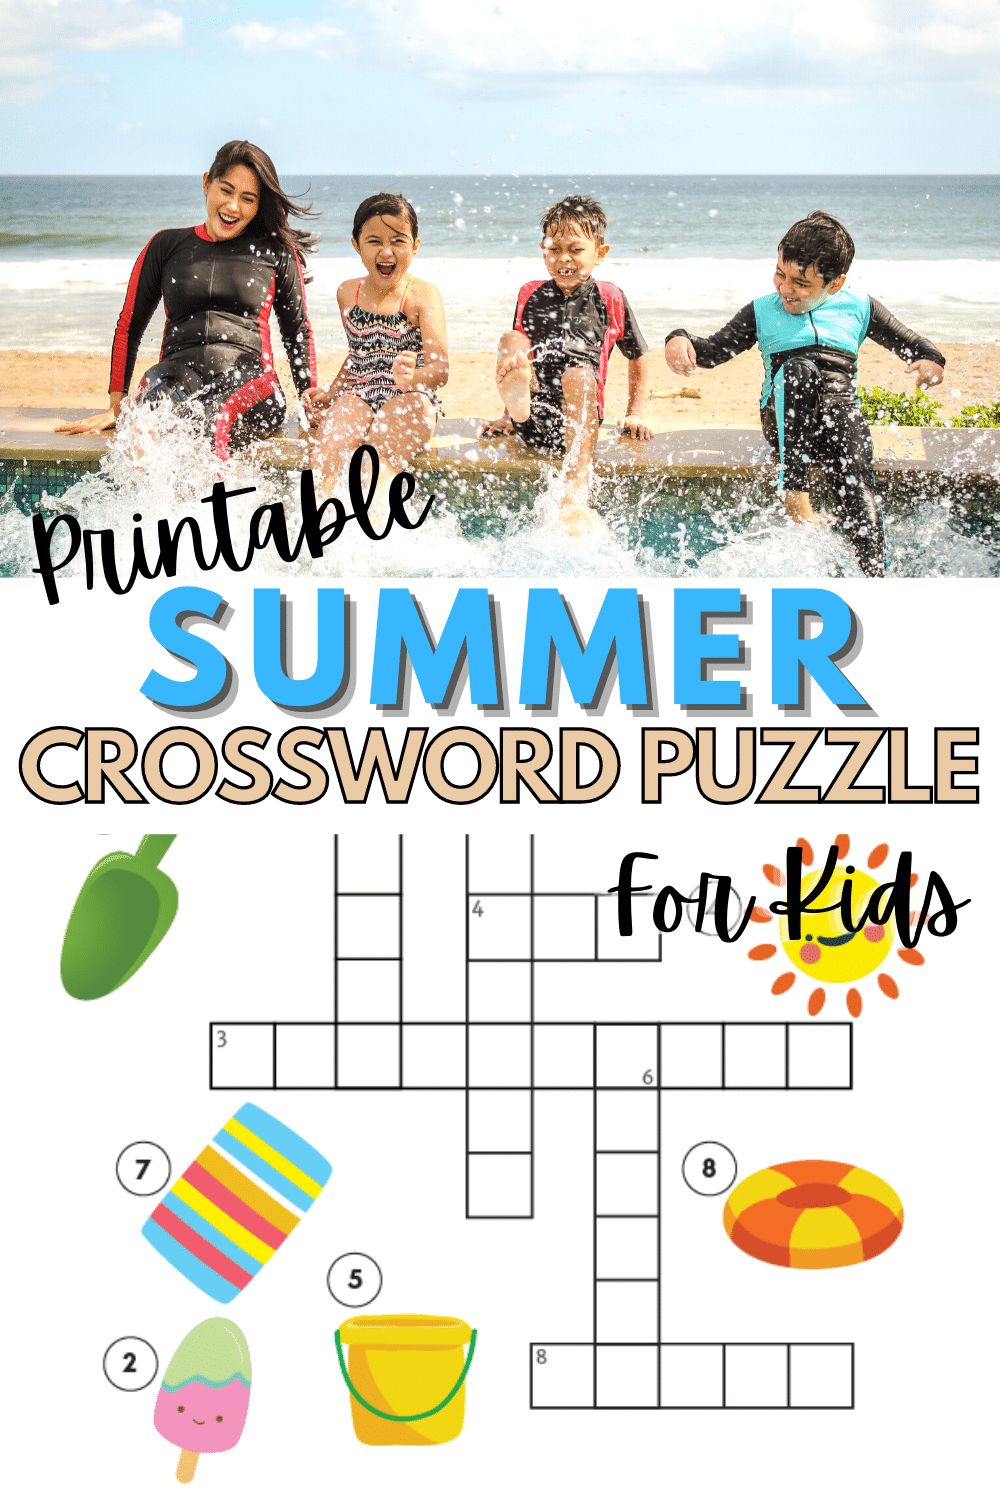 This printable summer crossword puzzle for kids is perfect for hot summer days when going outdoors isn't an option. Easy puzzle that kids will love. #crosswordpuzzles #printables #summer via @wondermomwannab